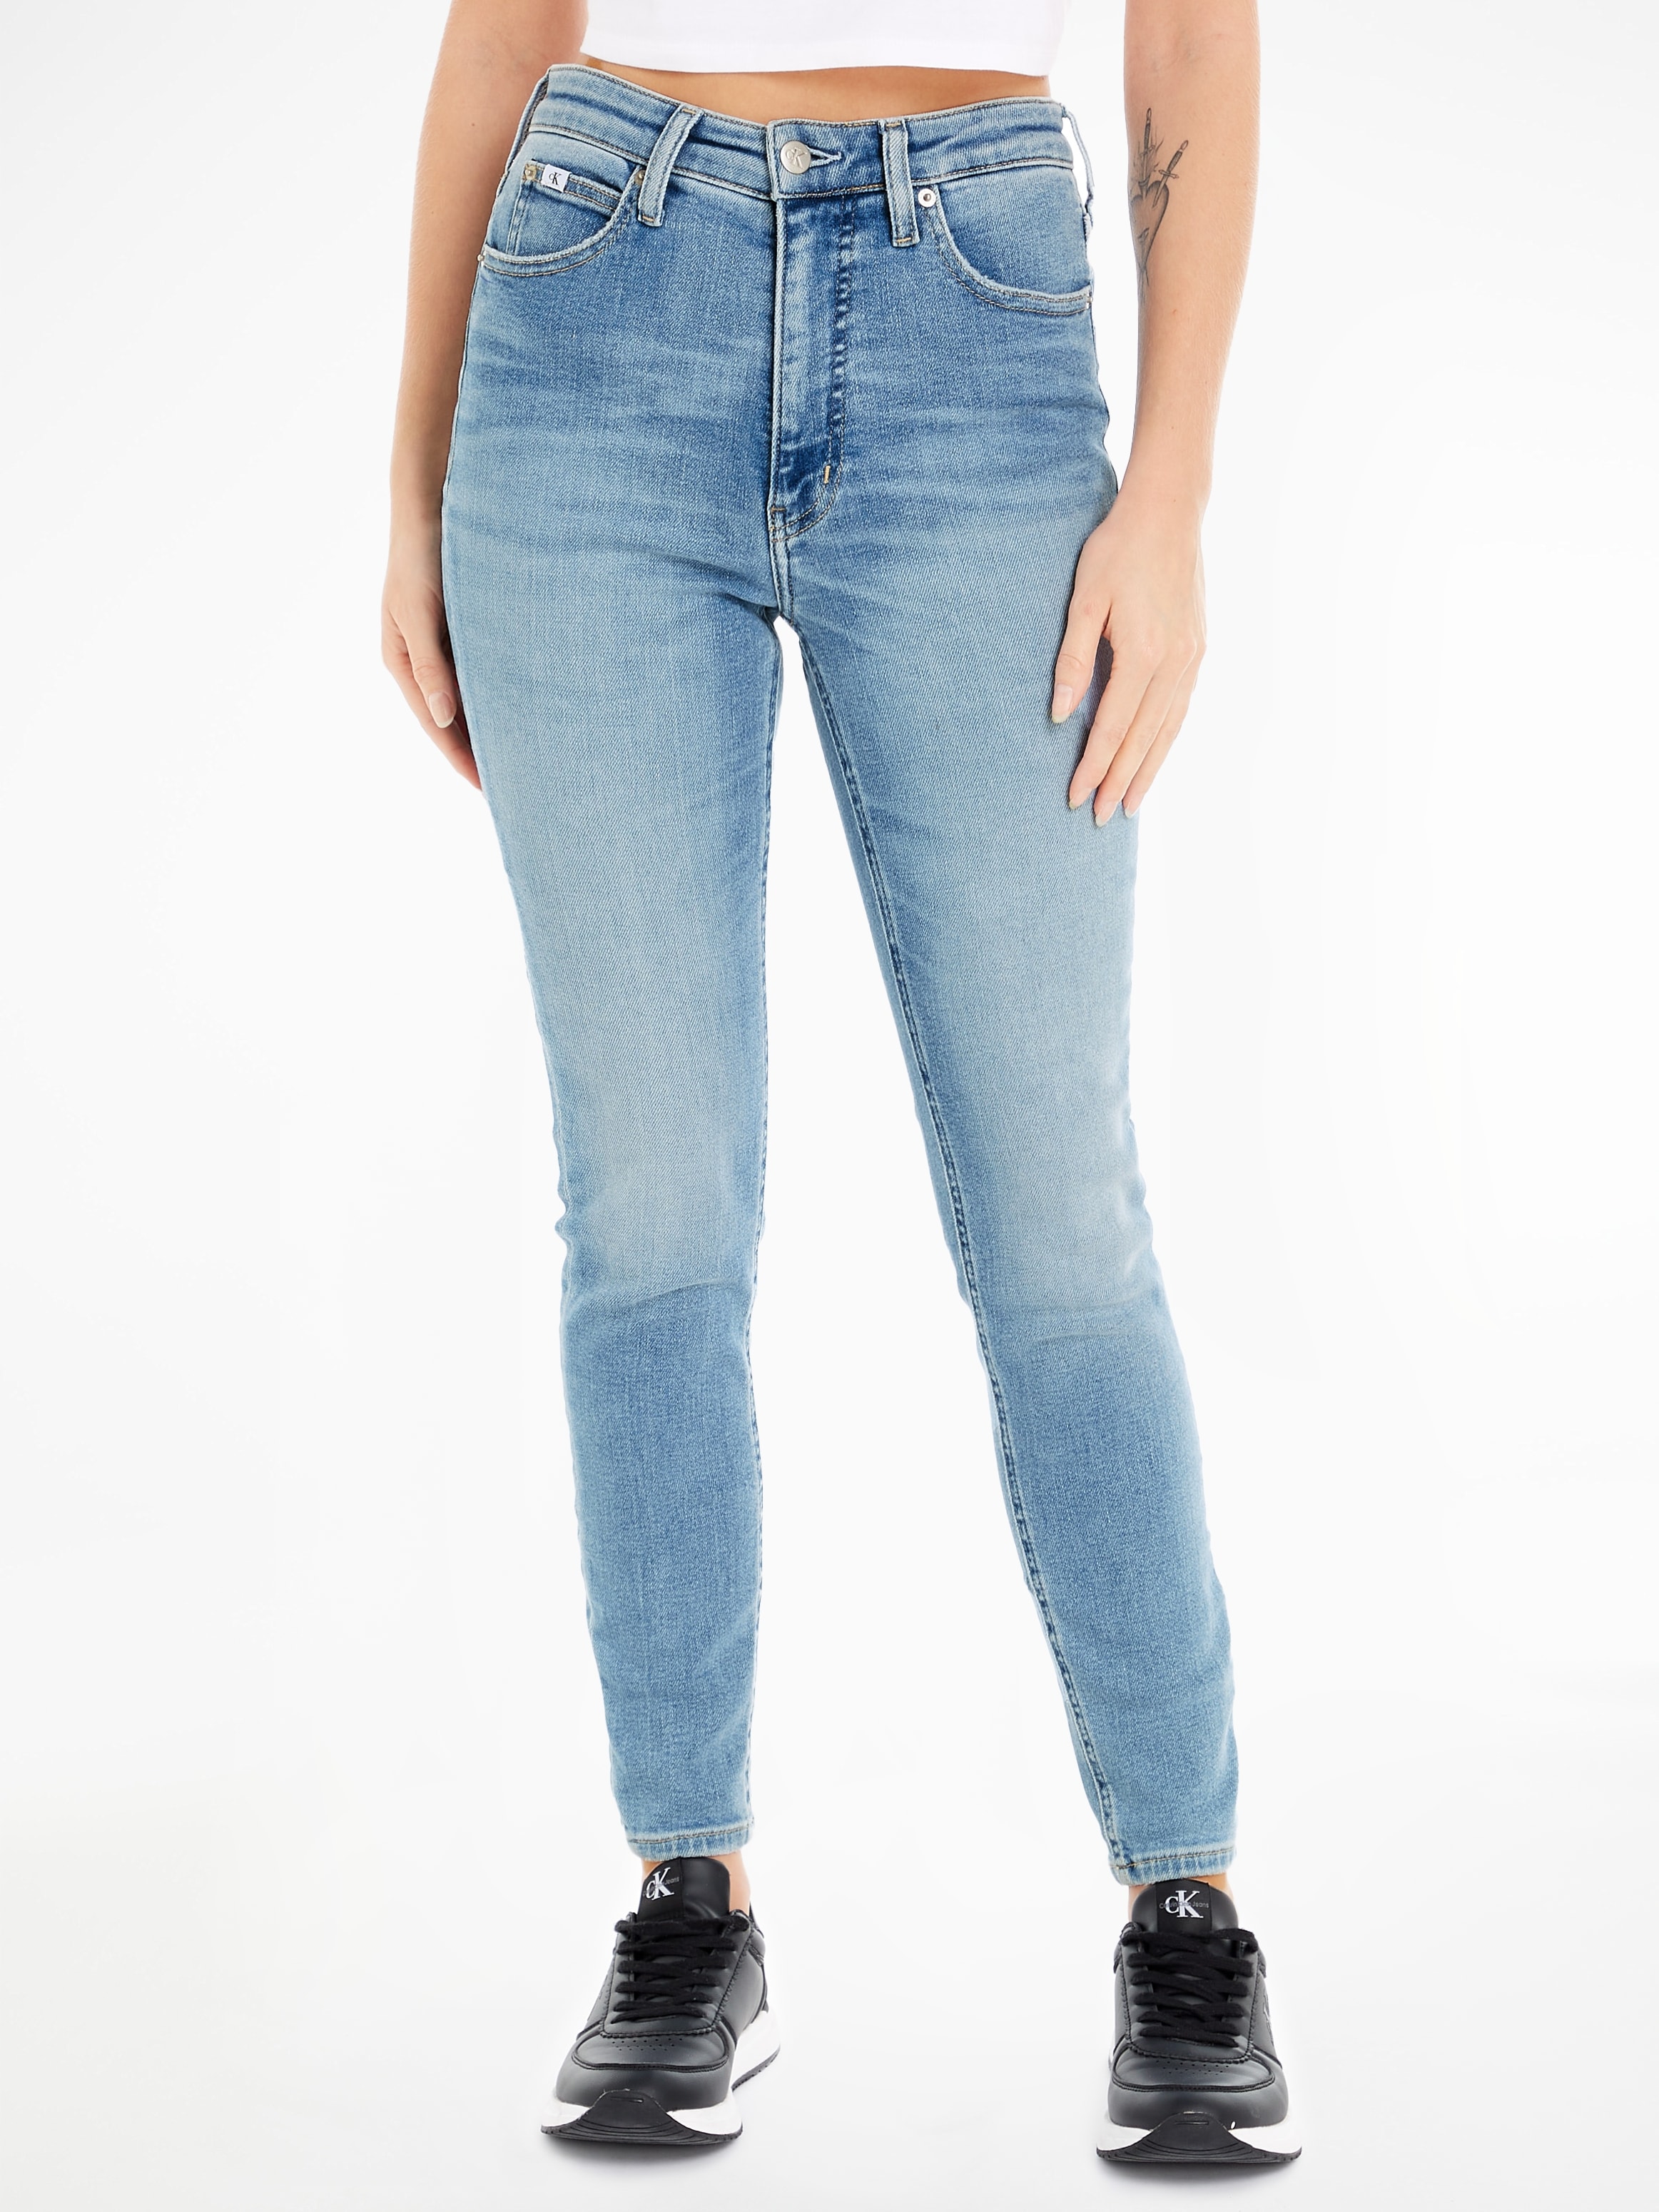 Skinny-fit-Jeans bei RISE Jeans SUPER SKINNY ANKLE« Klein OTTO Calvin »HIGH